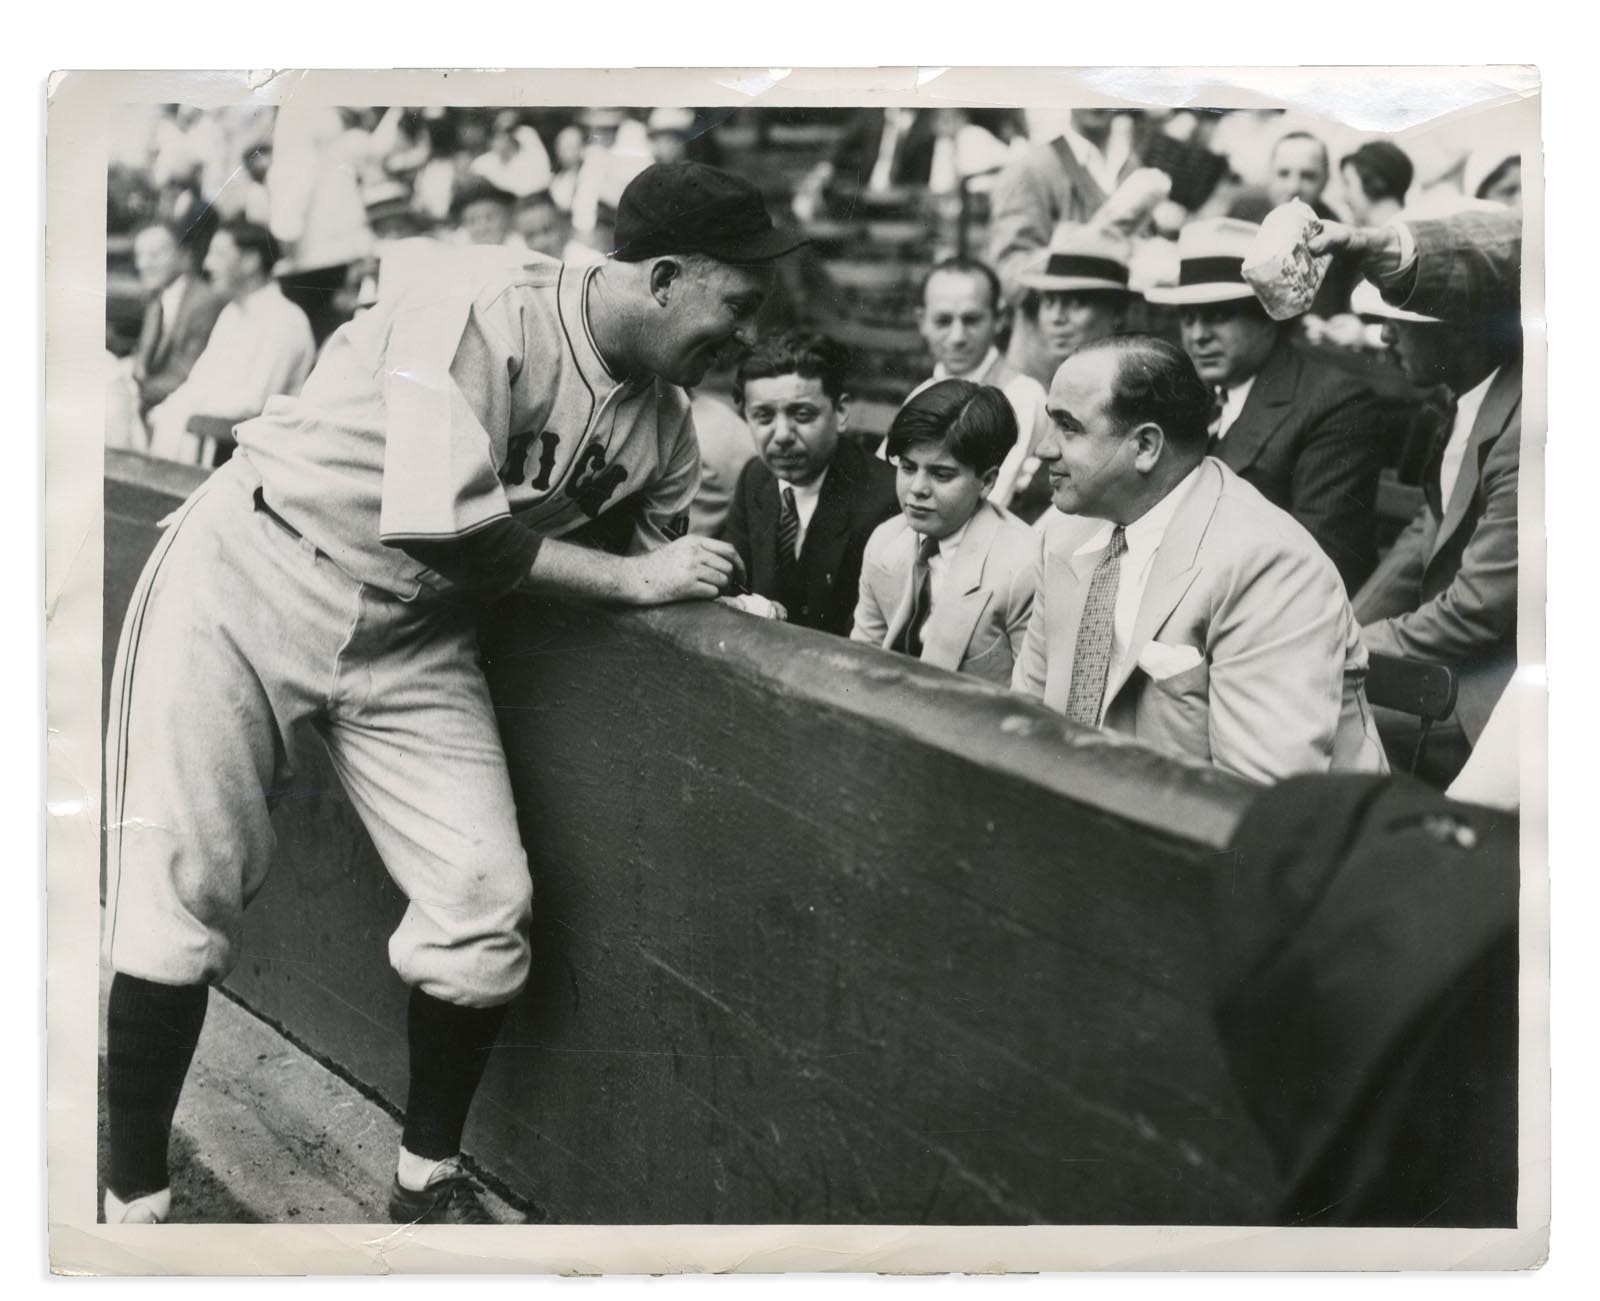 Best of the Best - 1931 Al Capone "Take Us out to the Ball Game" Iconic Type I Photo w/Hartnett